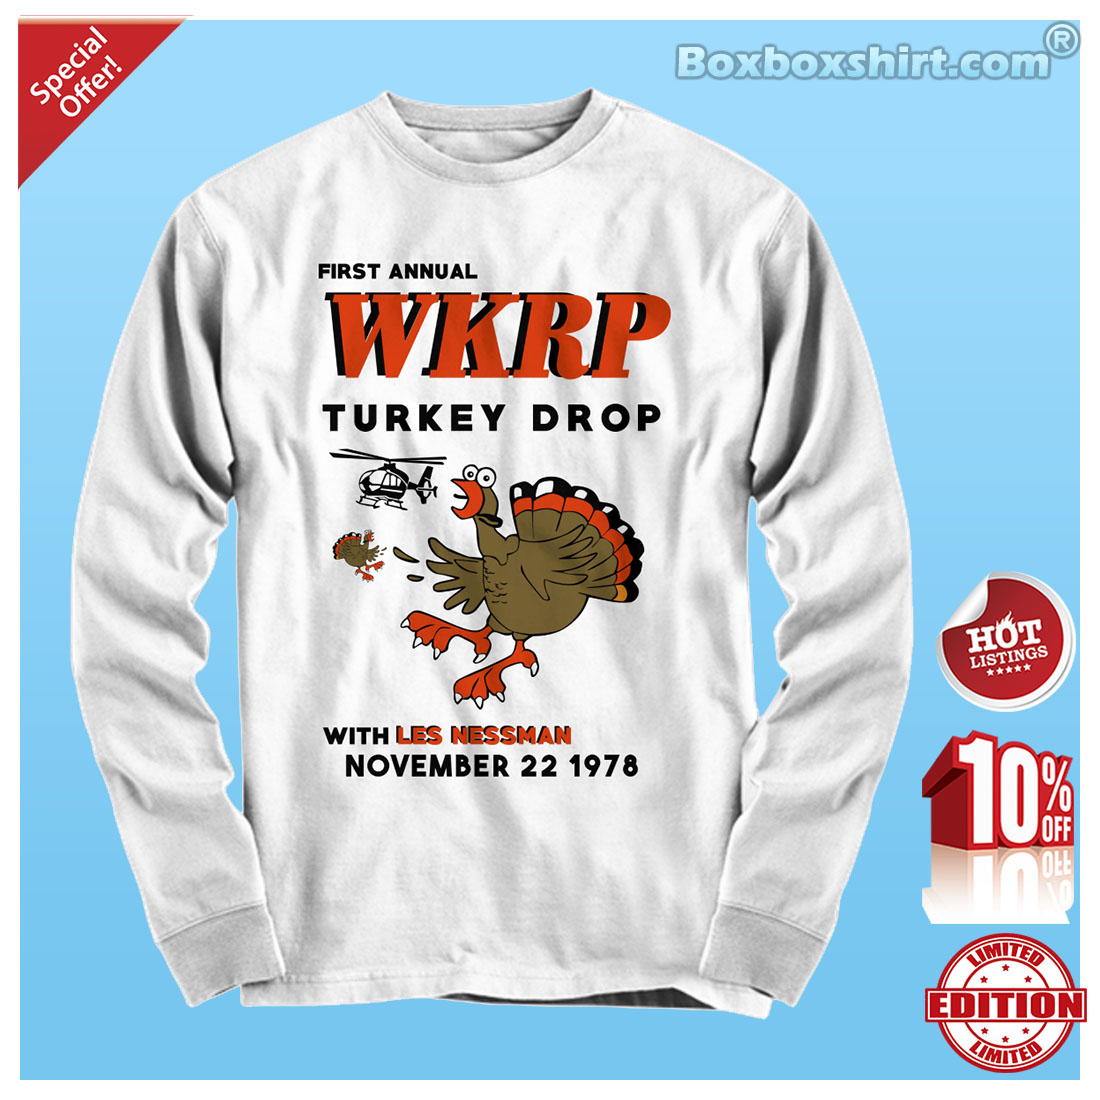 First annual WKRP turkey drop with Les Nessman shirt. 